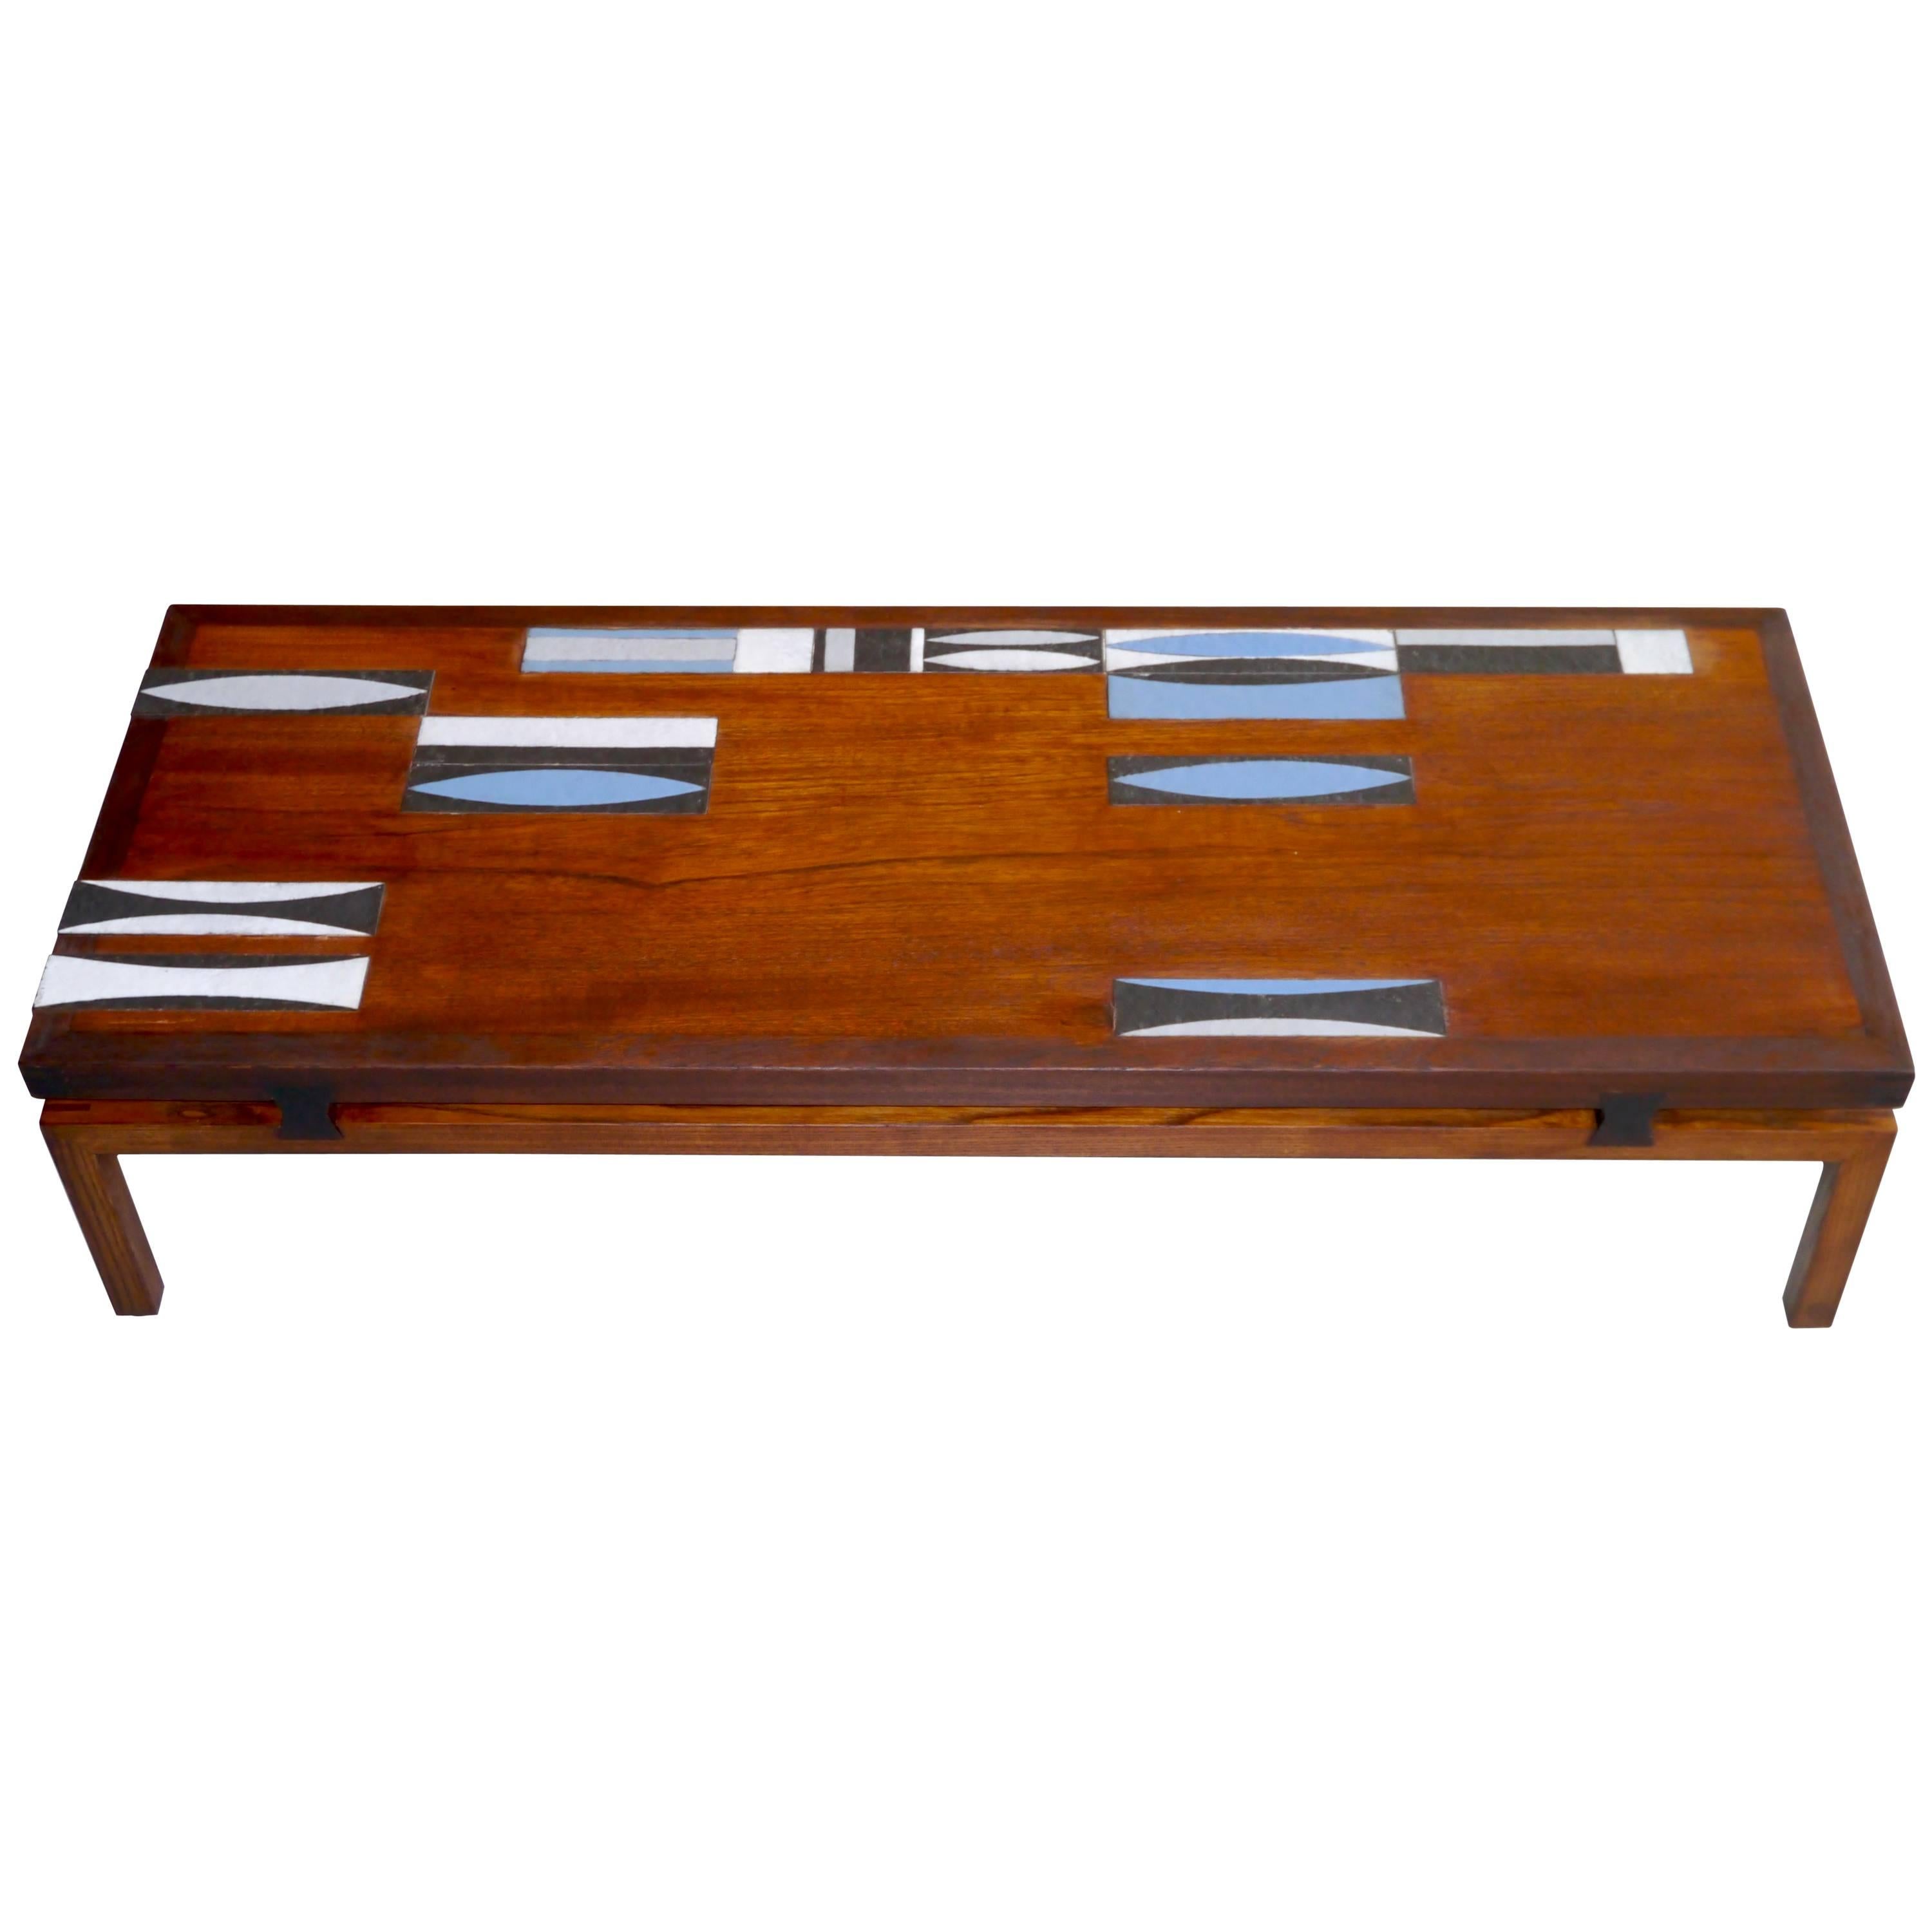 Roger Capron - Exceptional Coffee Table - Vallauris France - c. 1960 For Sale